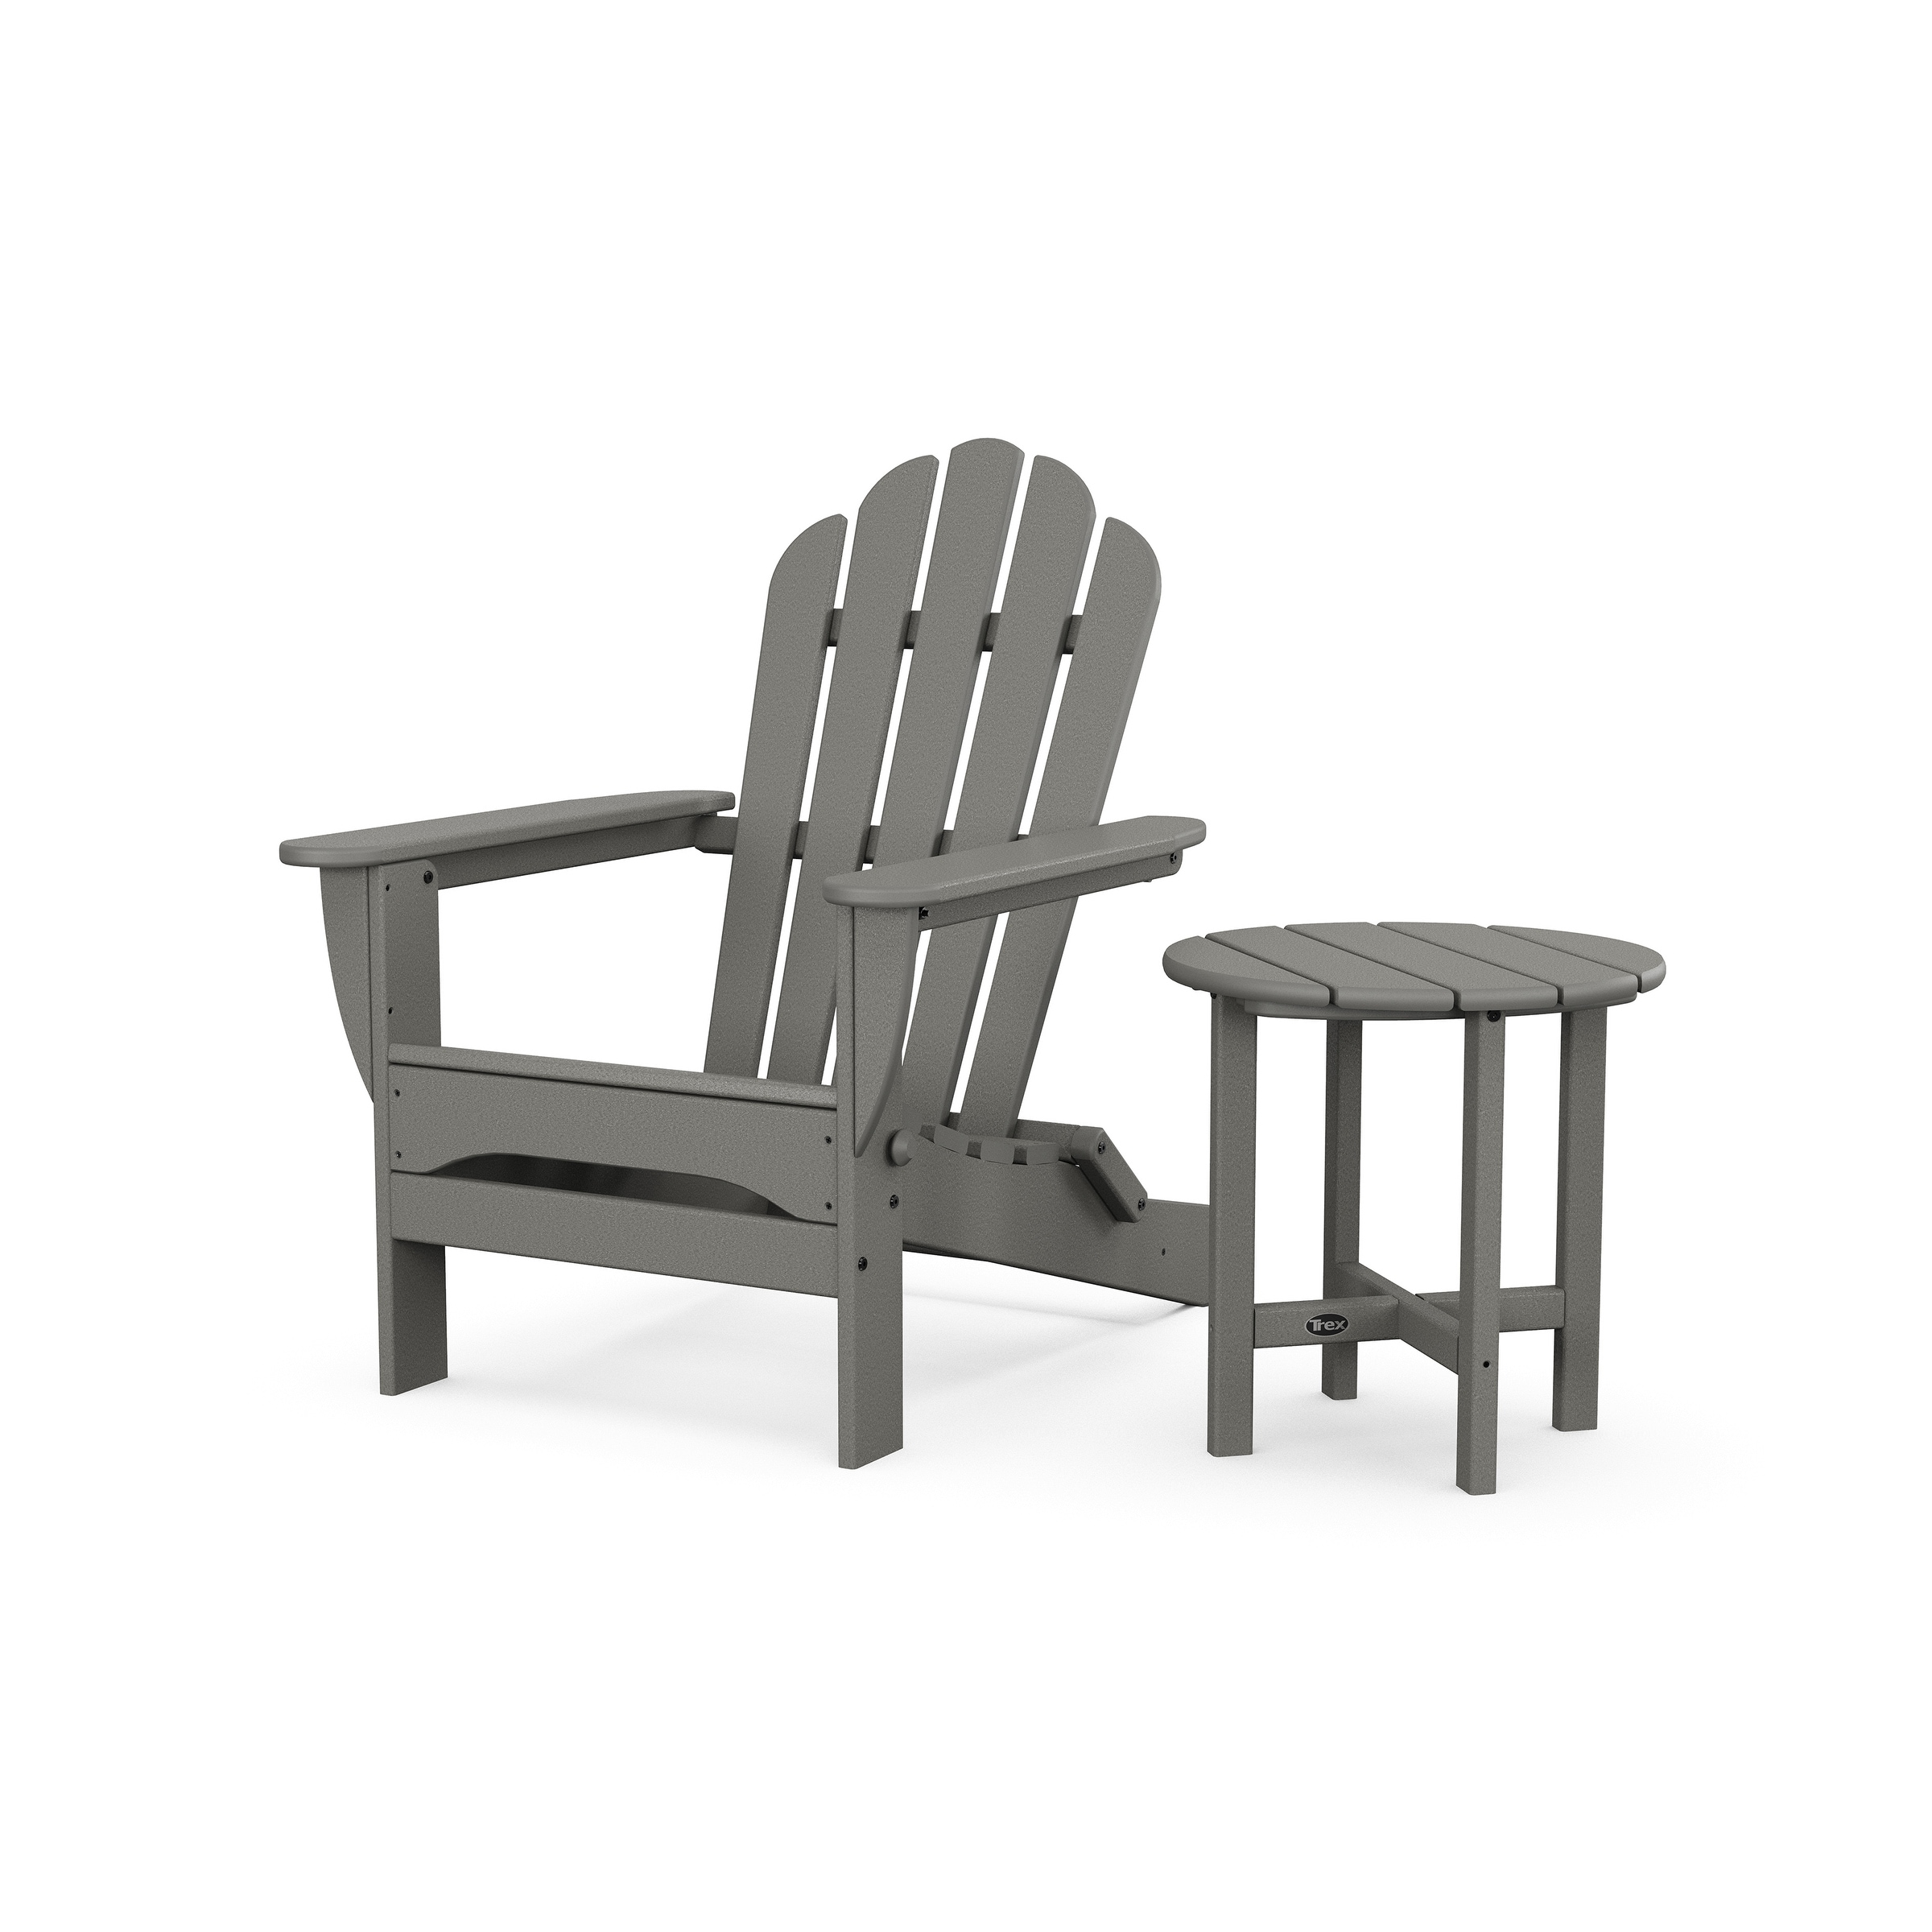 Monterey Bay Folding Adirondack Chair With Side Table